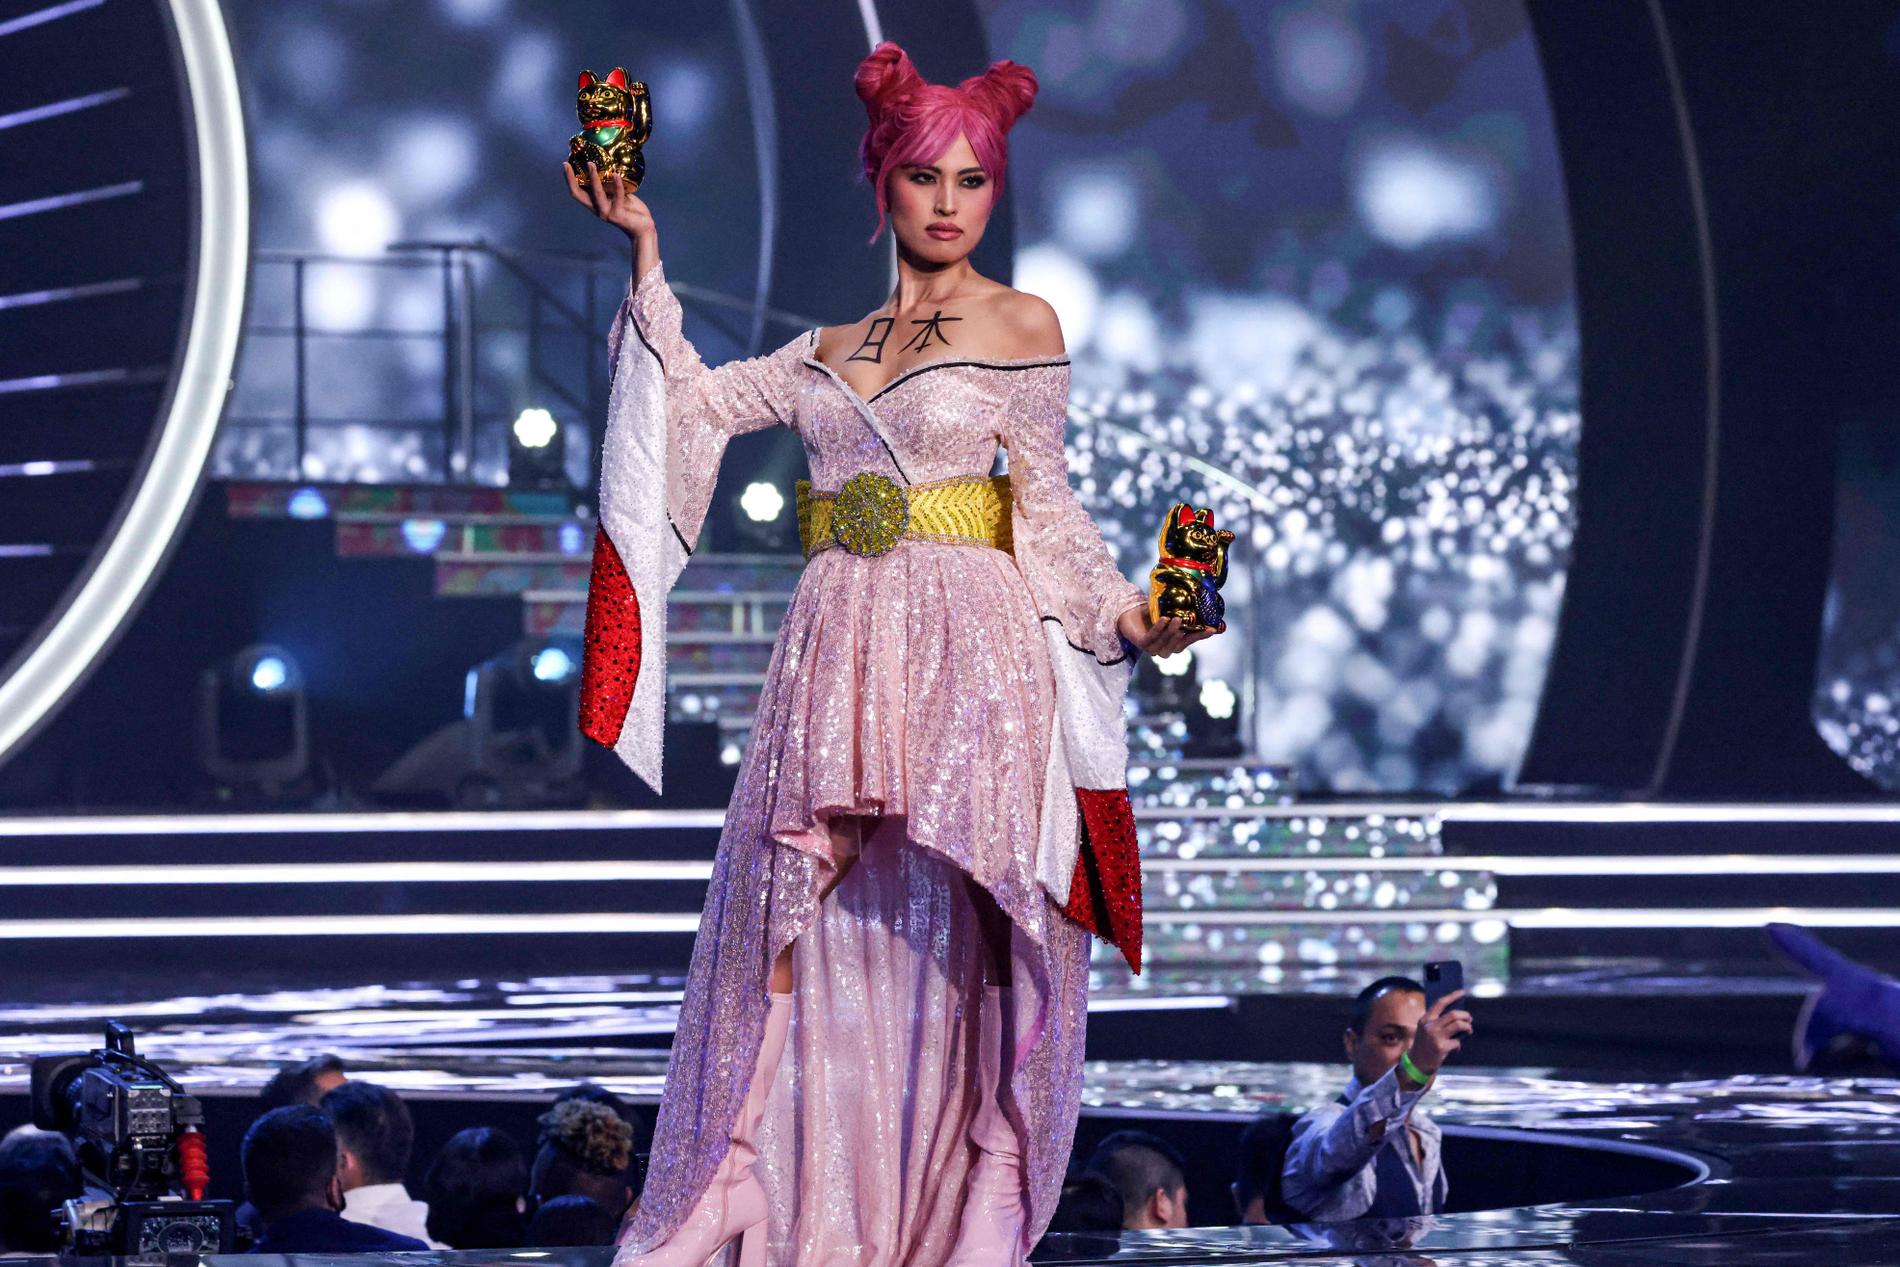 Japan's Miss Universe dress sparks controversy - VG